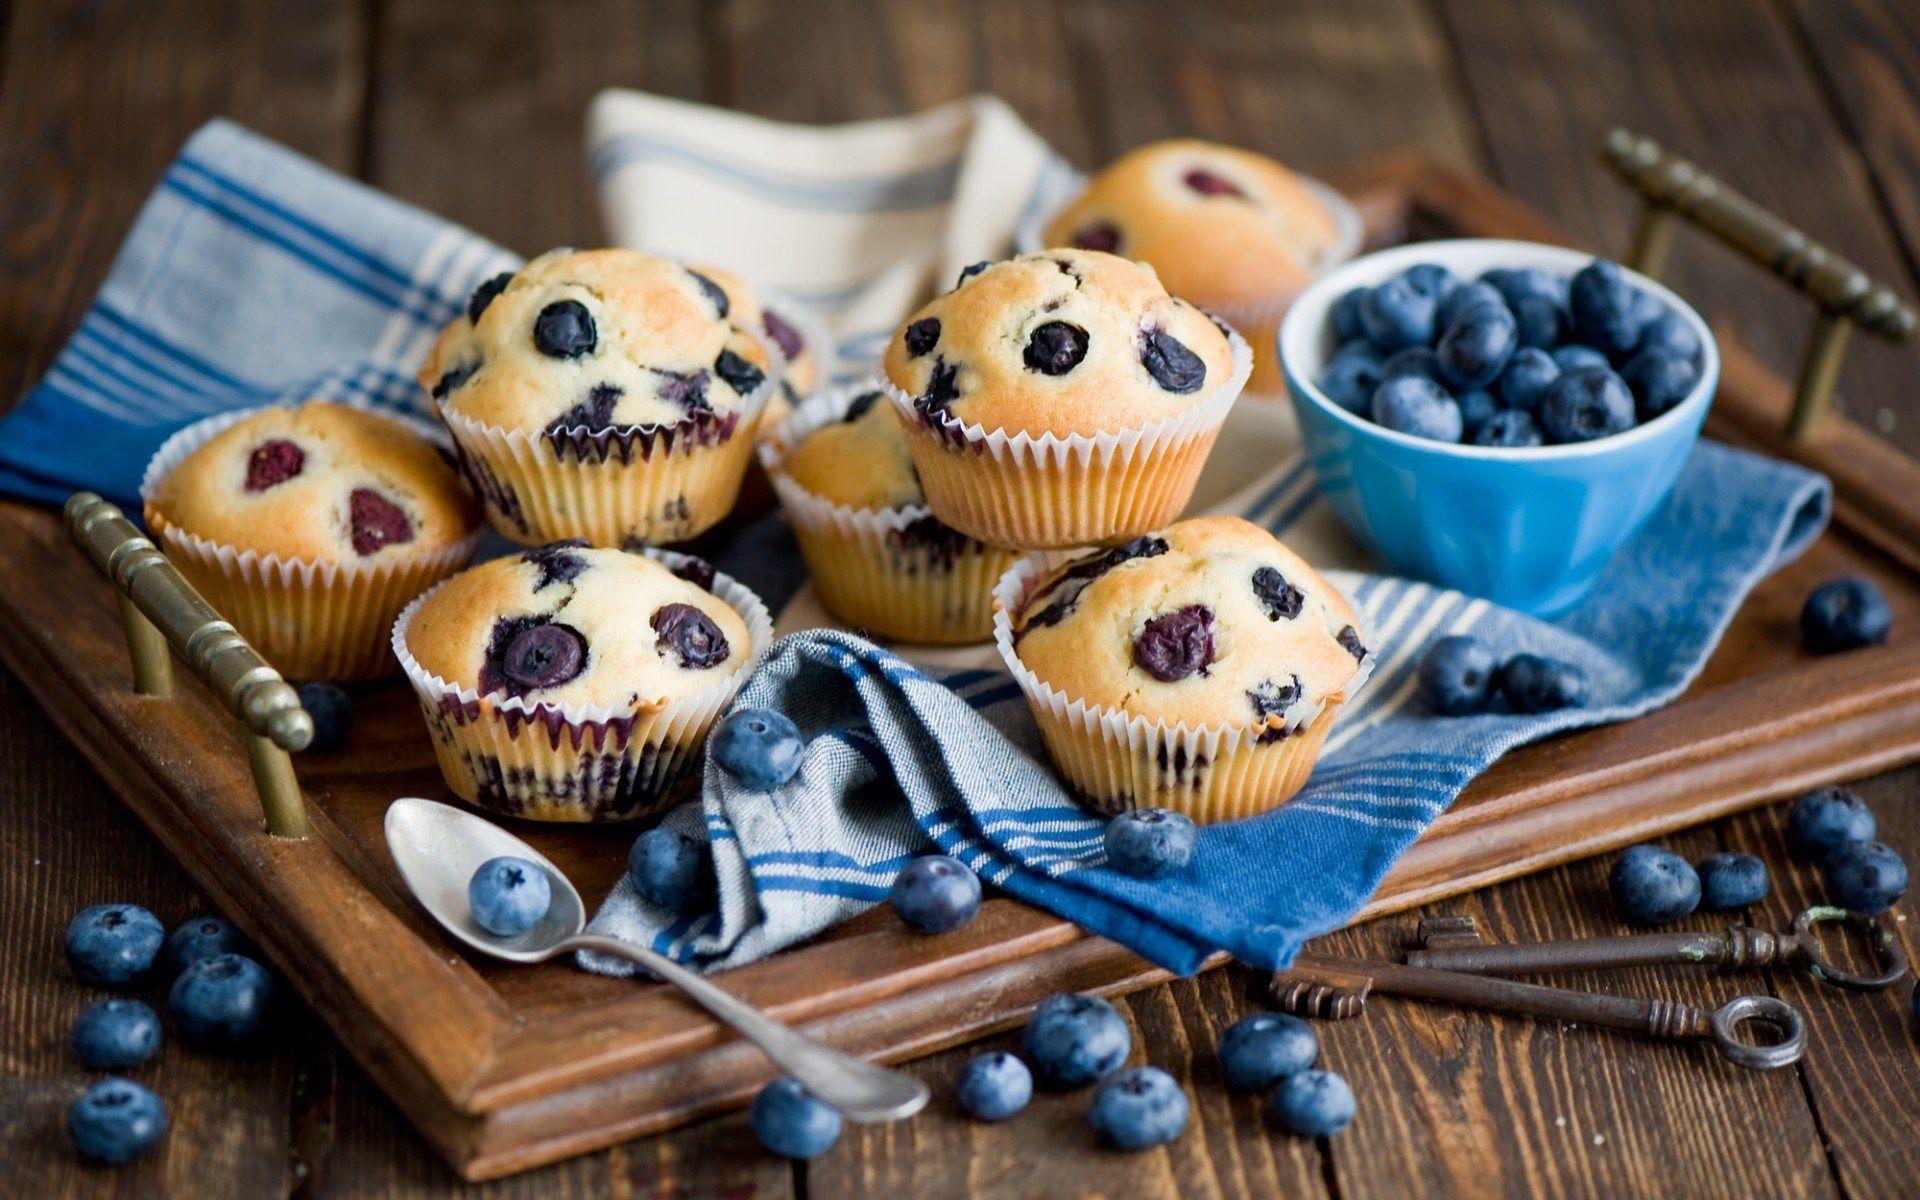 Top Blueberry Muffin HQ Picture, Blueberry Muffin WD 99 Wallpaper